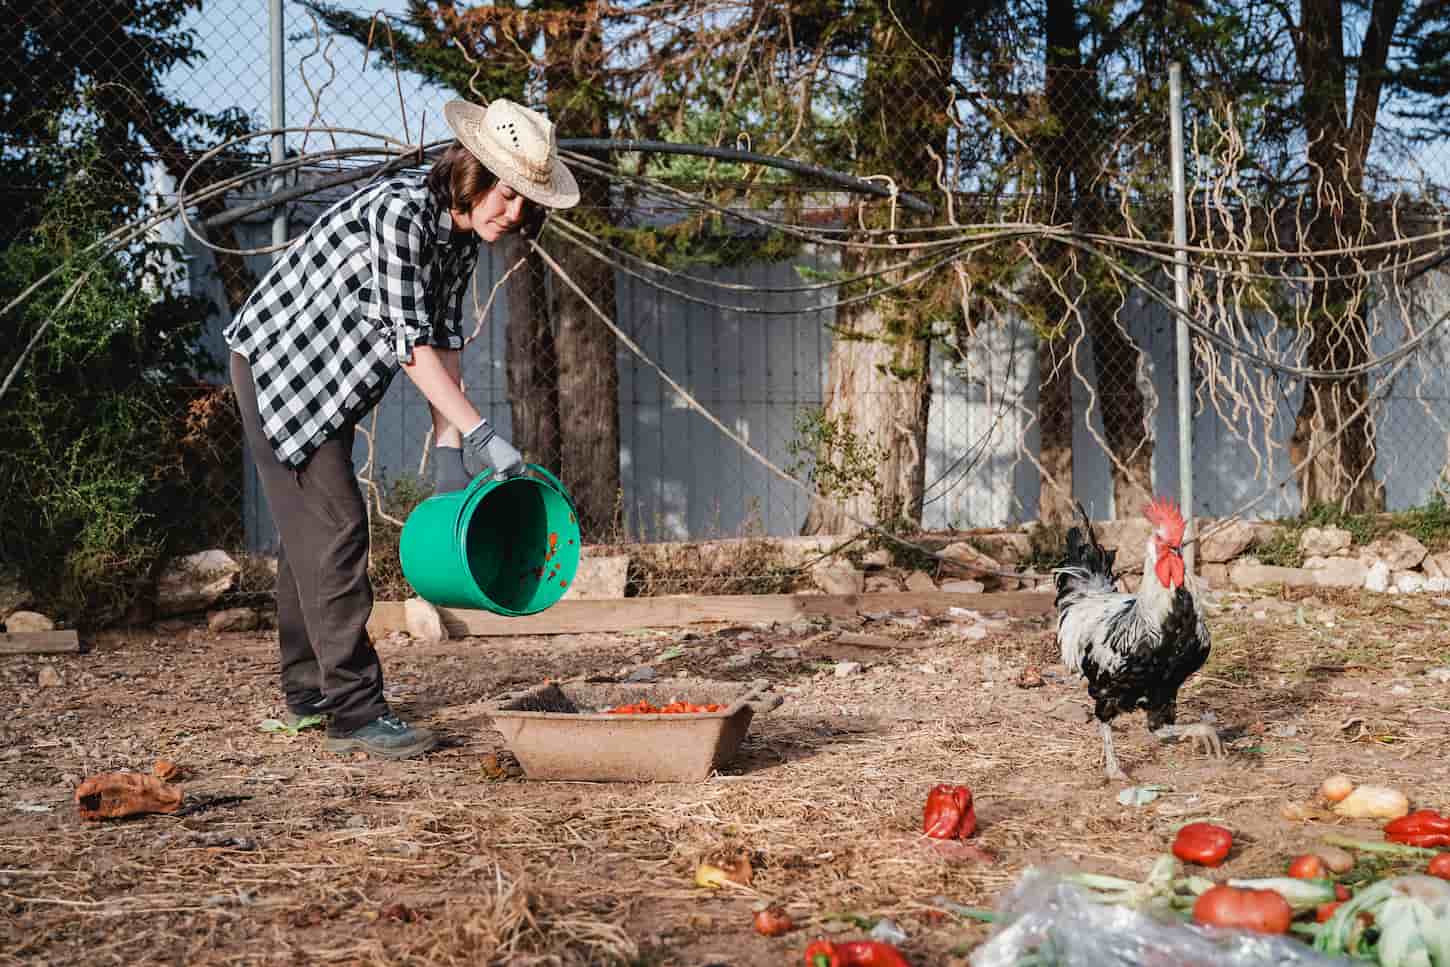 An image of a female farmer feeding chickens with organic food in the backyard.